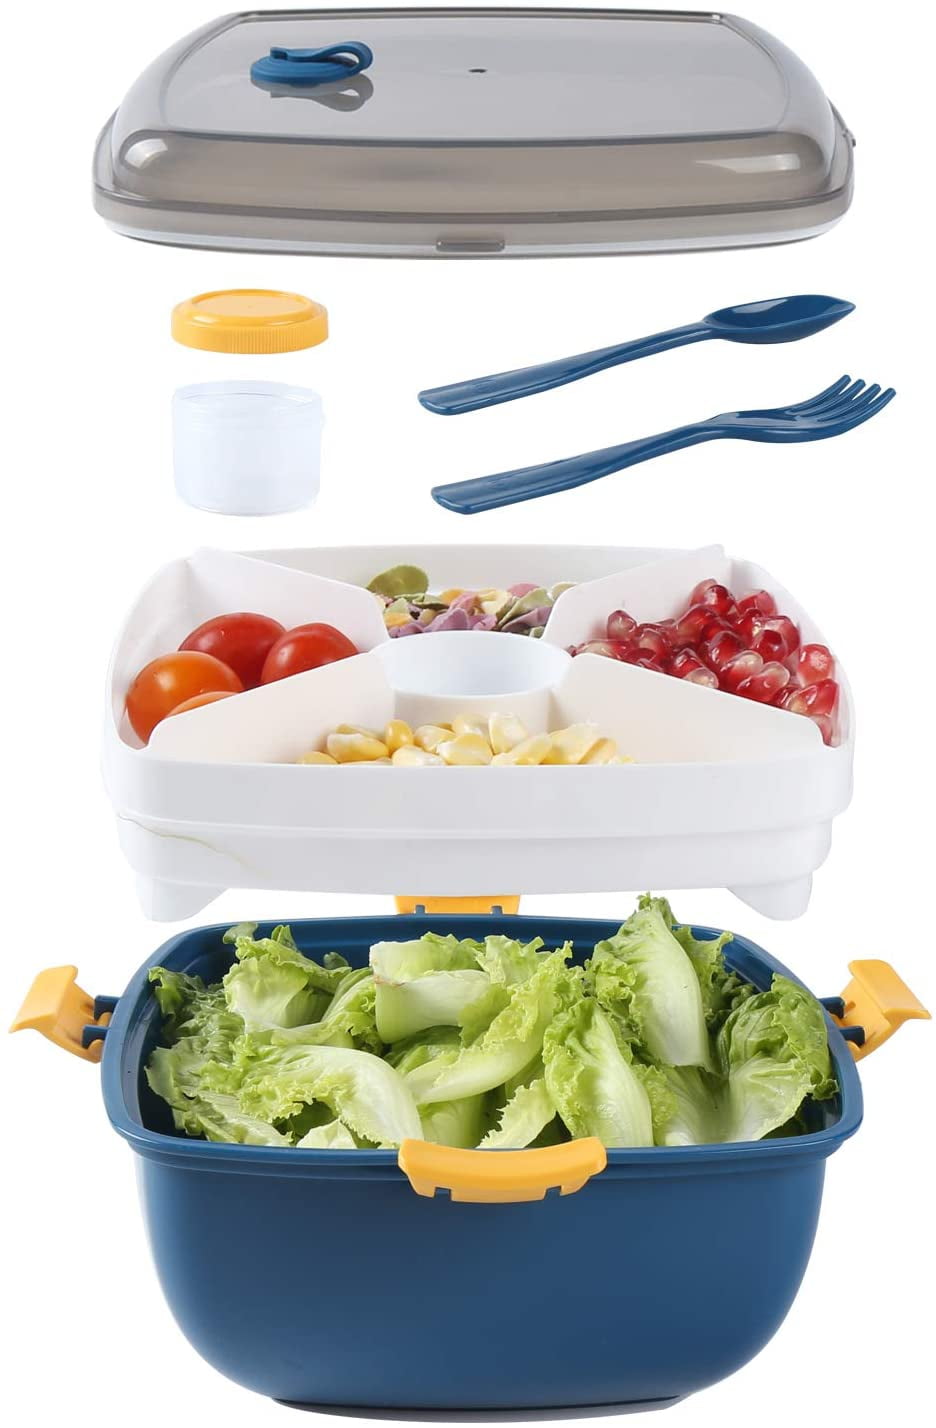 Details about   Salad Box Salad Bowl Small Deli Cups Salad Box with Lid 1000 ML show original title 